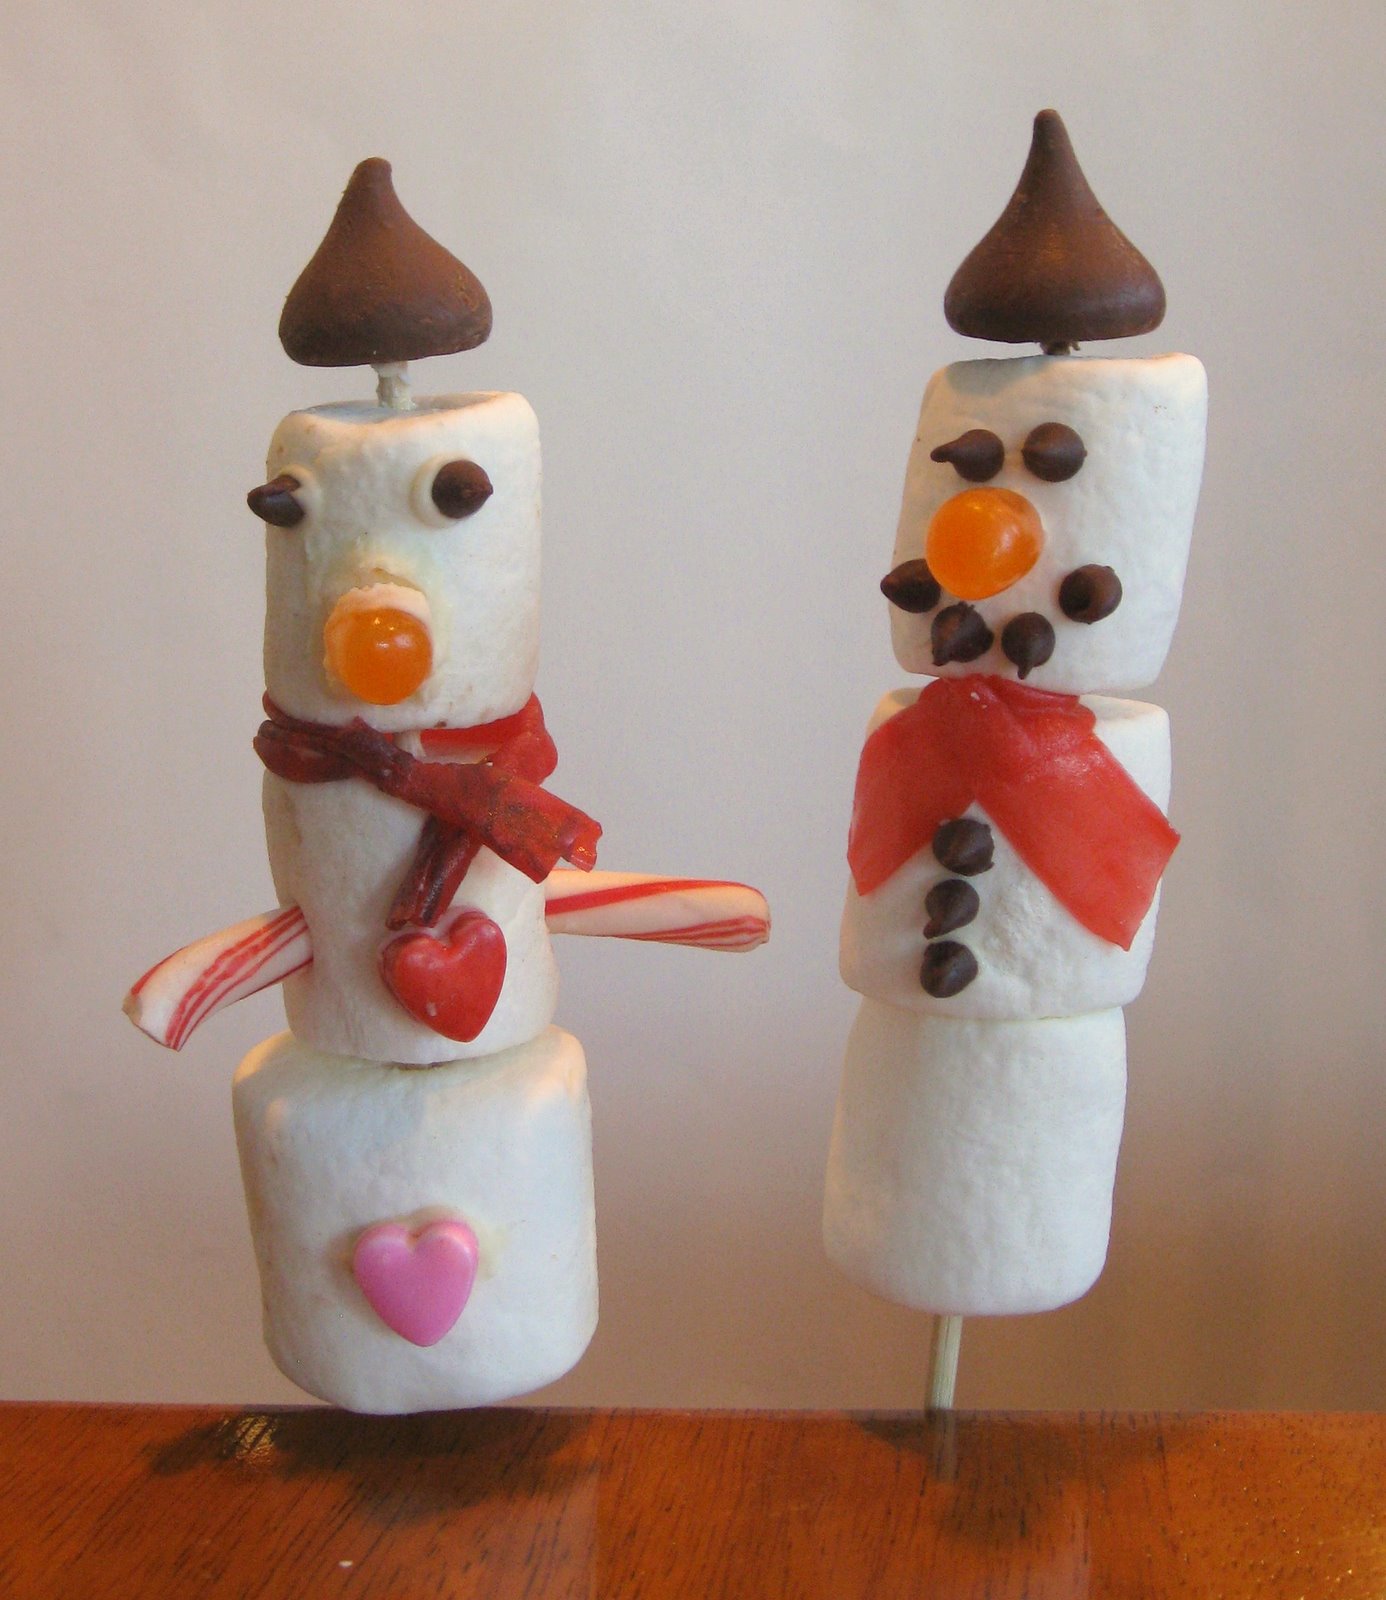 Marshmallow snowman crafts for kids